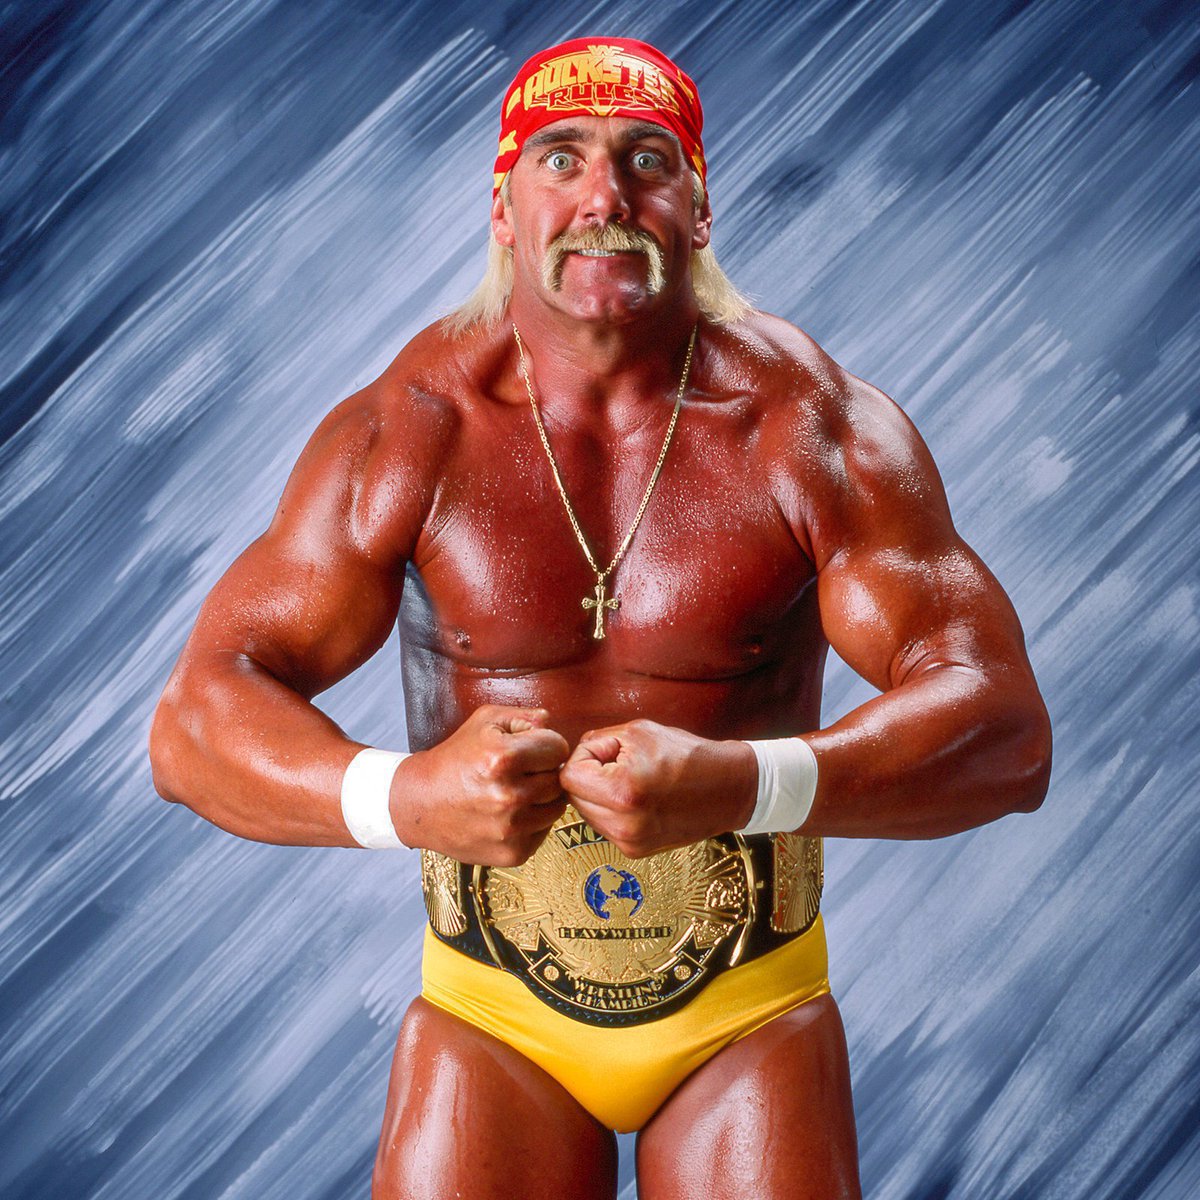 WWF Wrestling on X: "World Champion of the day: Hulk Hogan - Started his  third reign as WWF World Champion at WrestleMania VII on March 24, 1991.  His third title run totaled